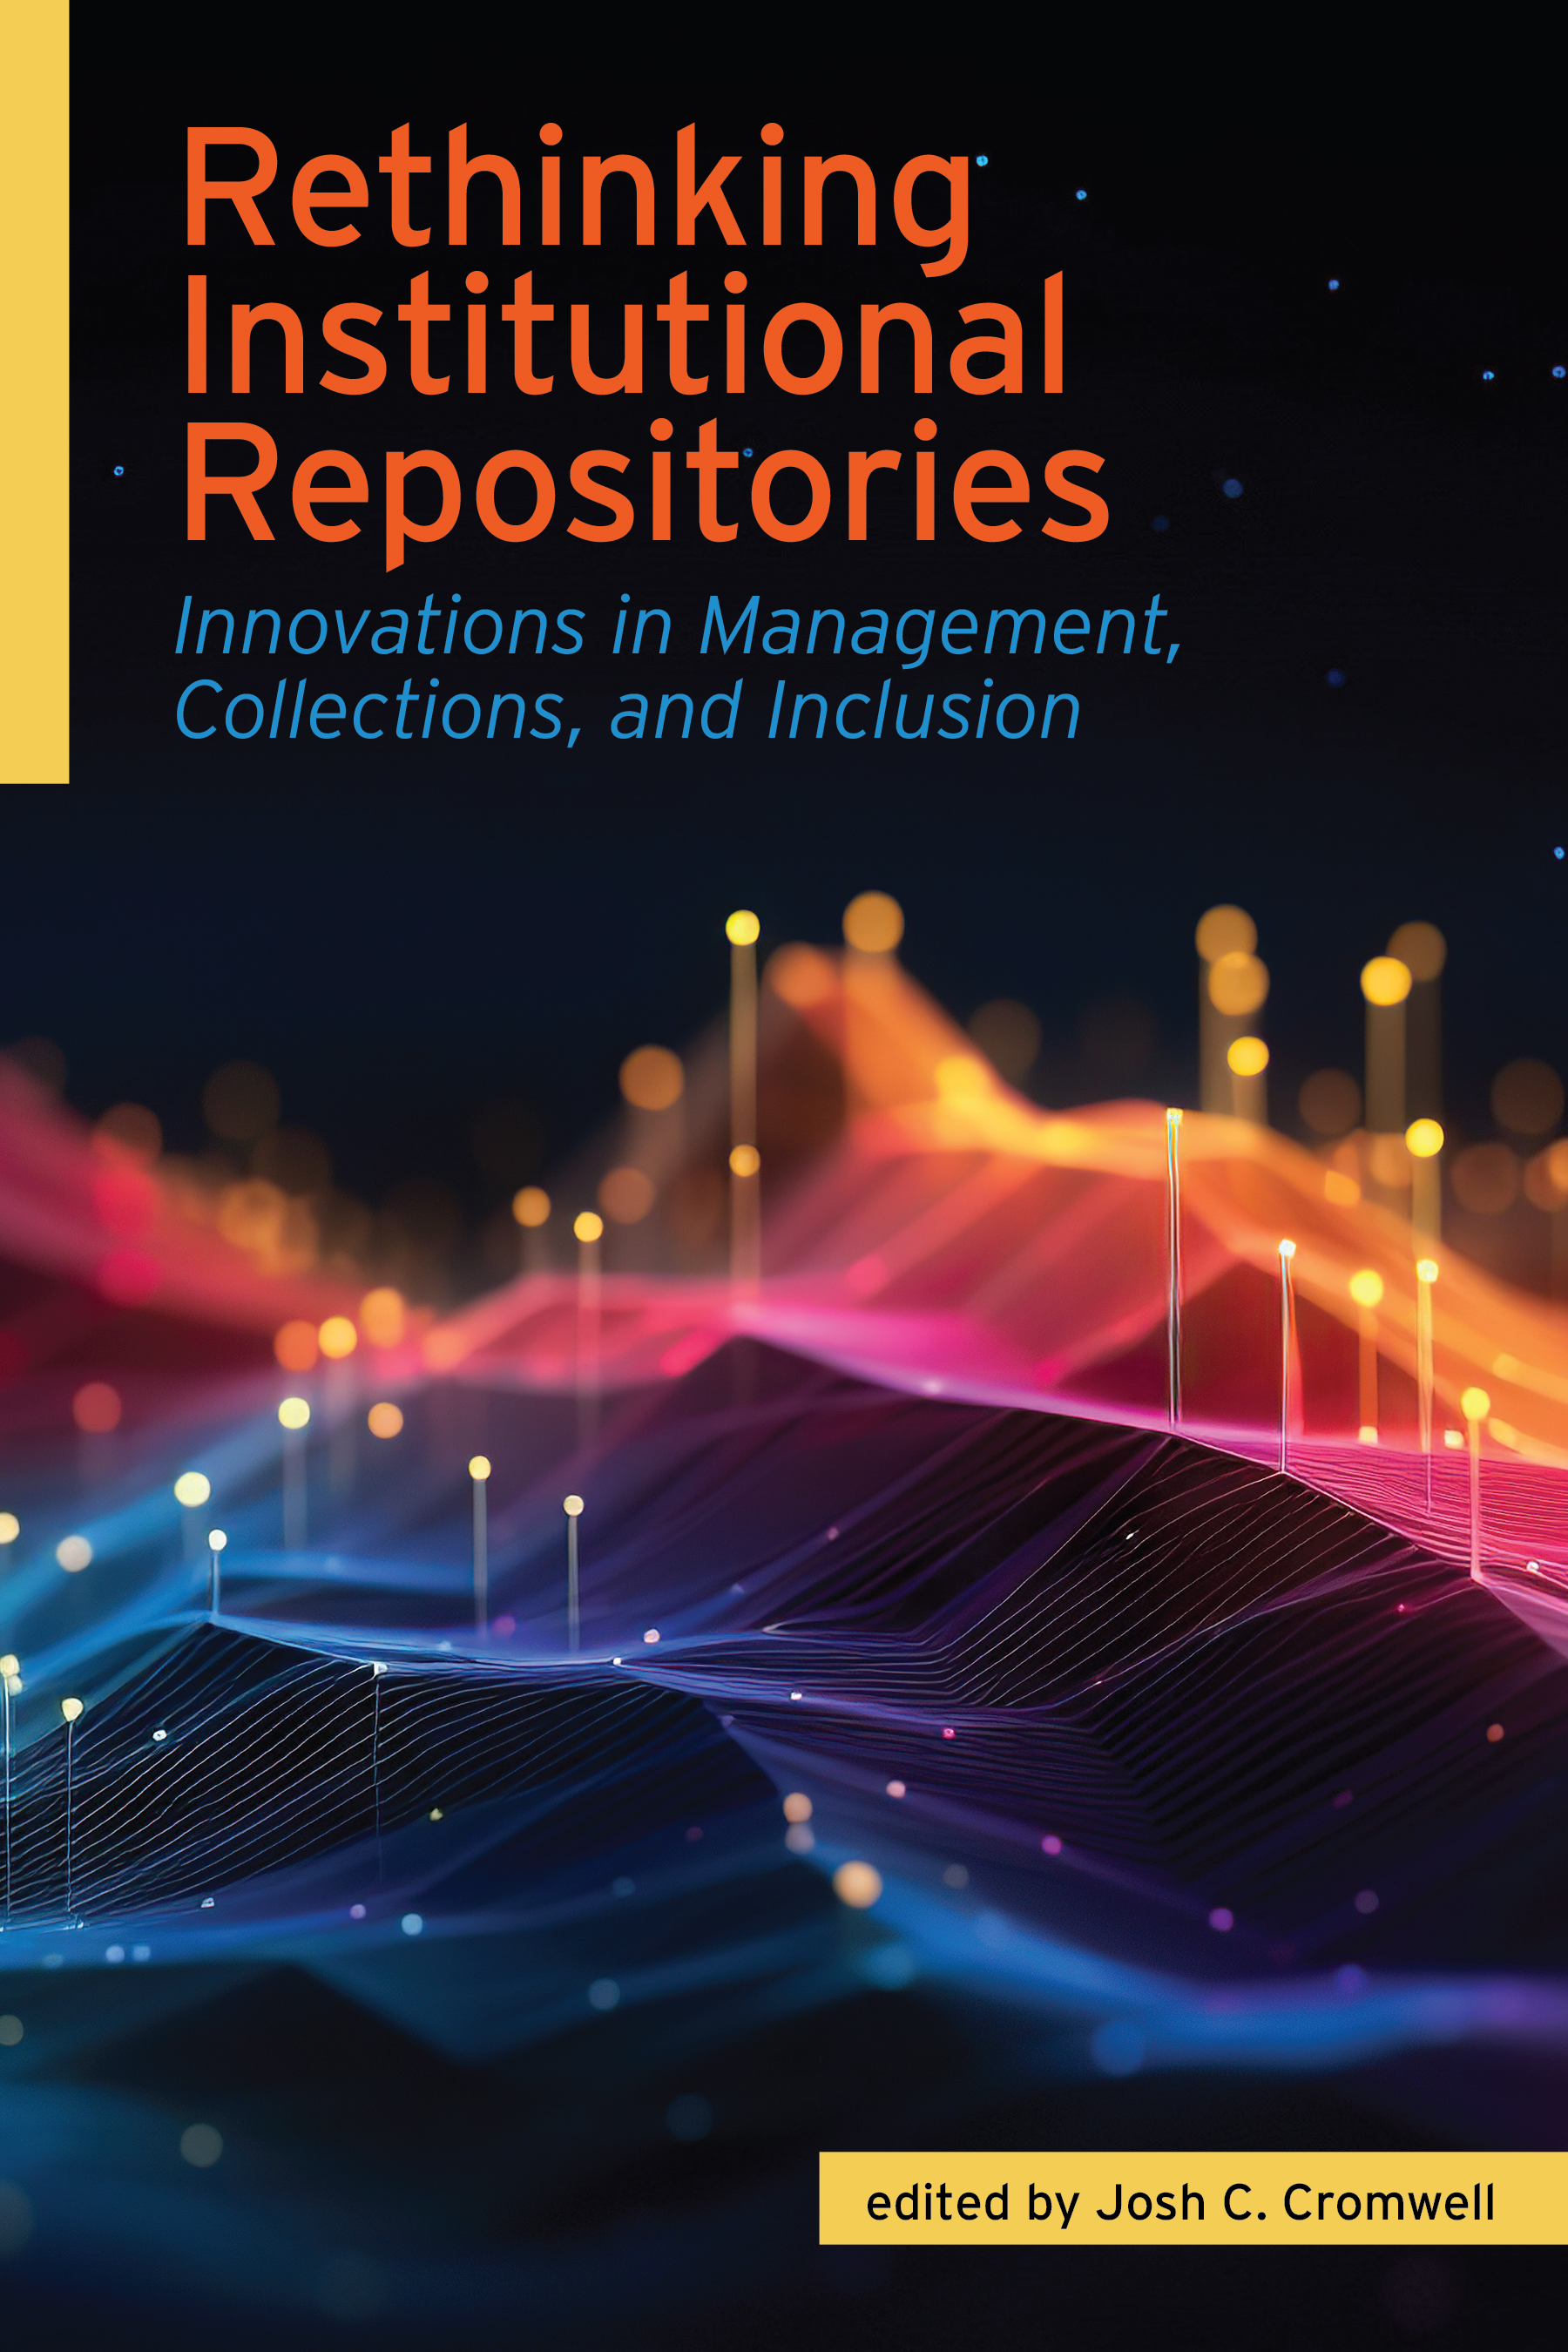 book cover for Rethinking Institutional Repositories: Innovations in Management, Collections, and Inclusion